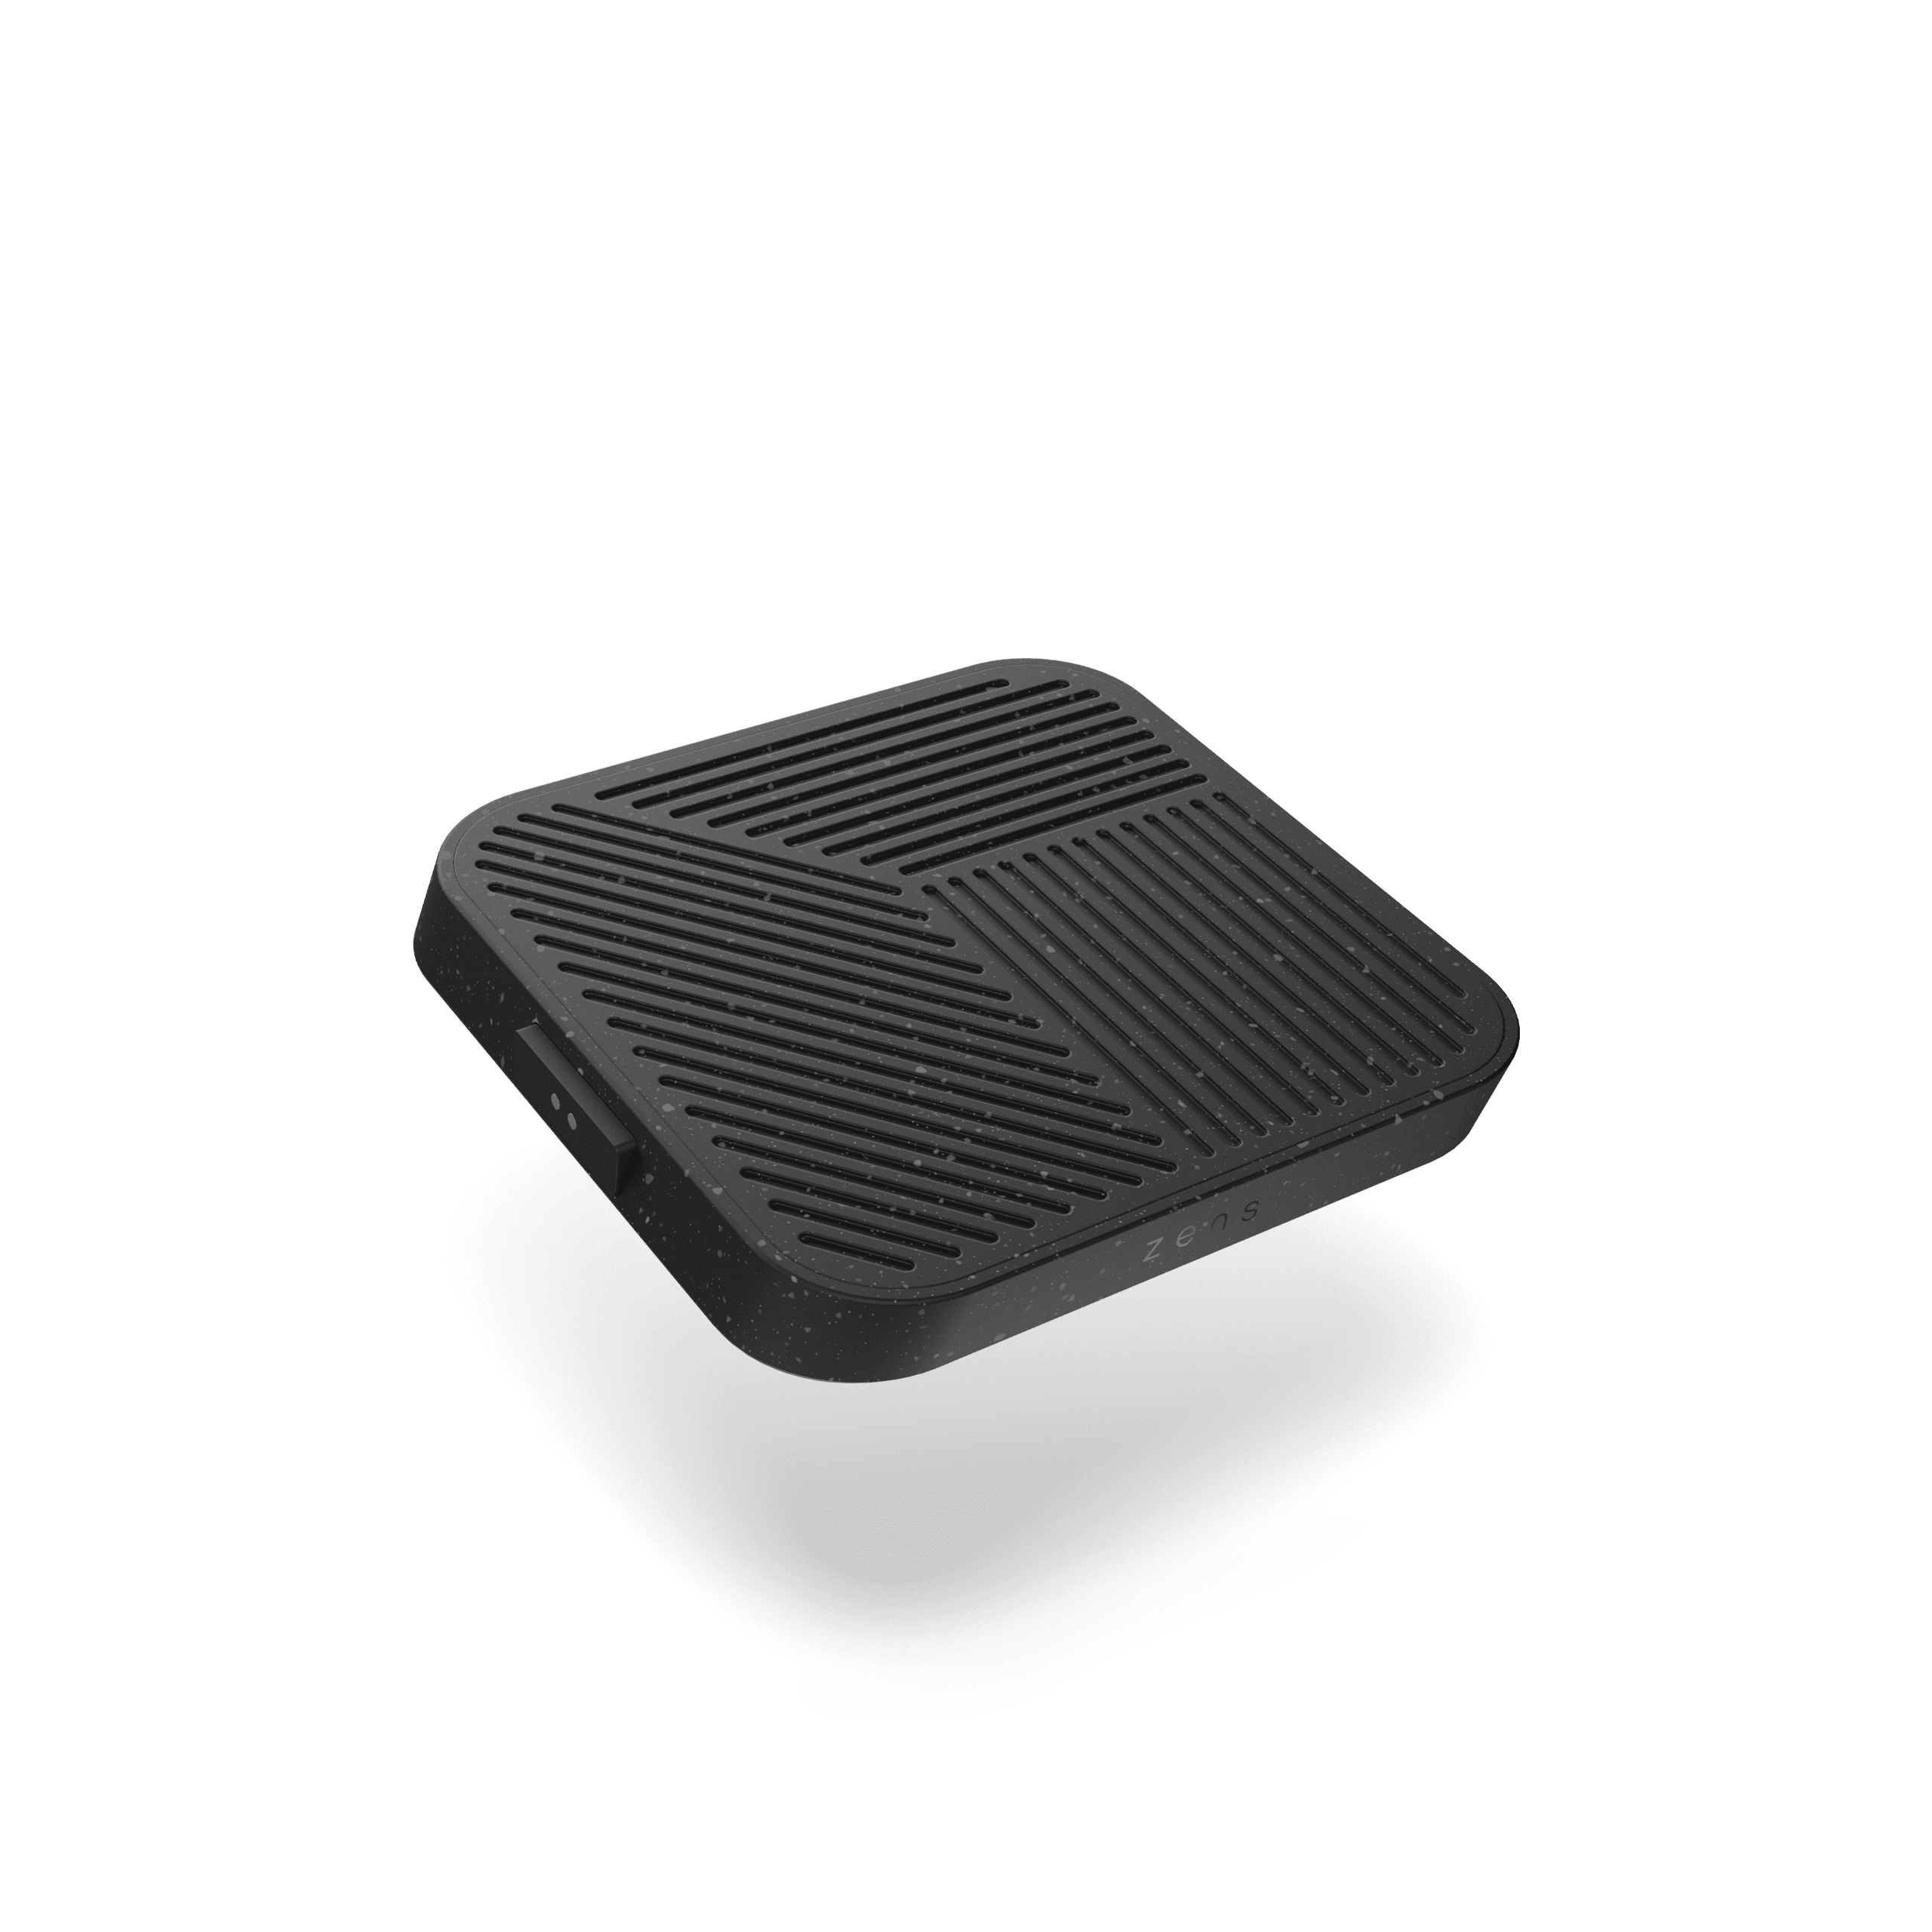 Modular single wireless charger extension